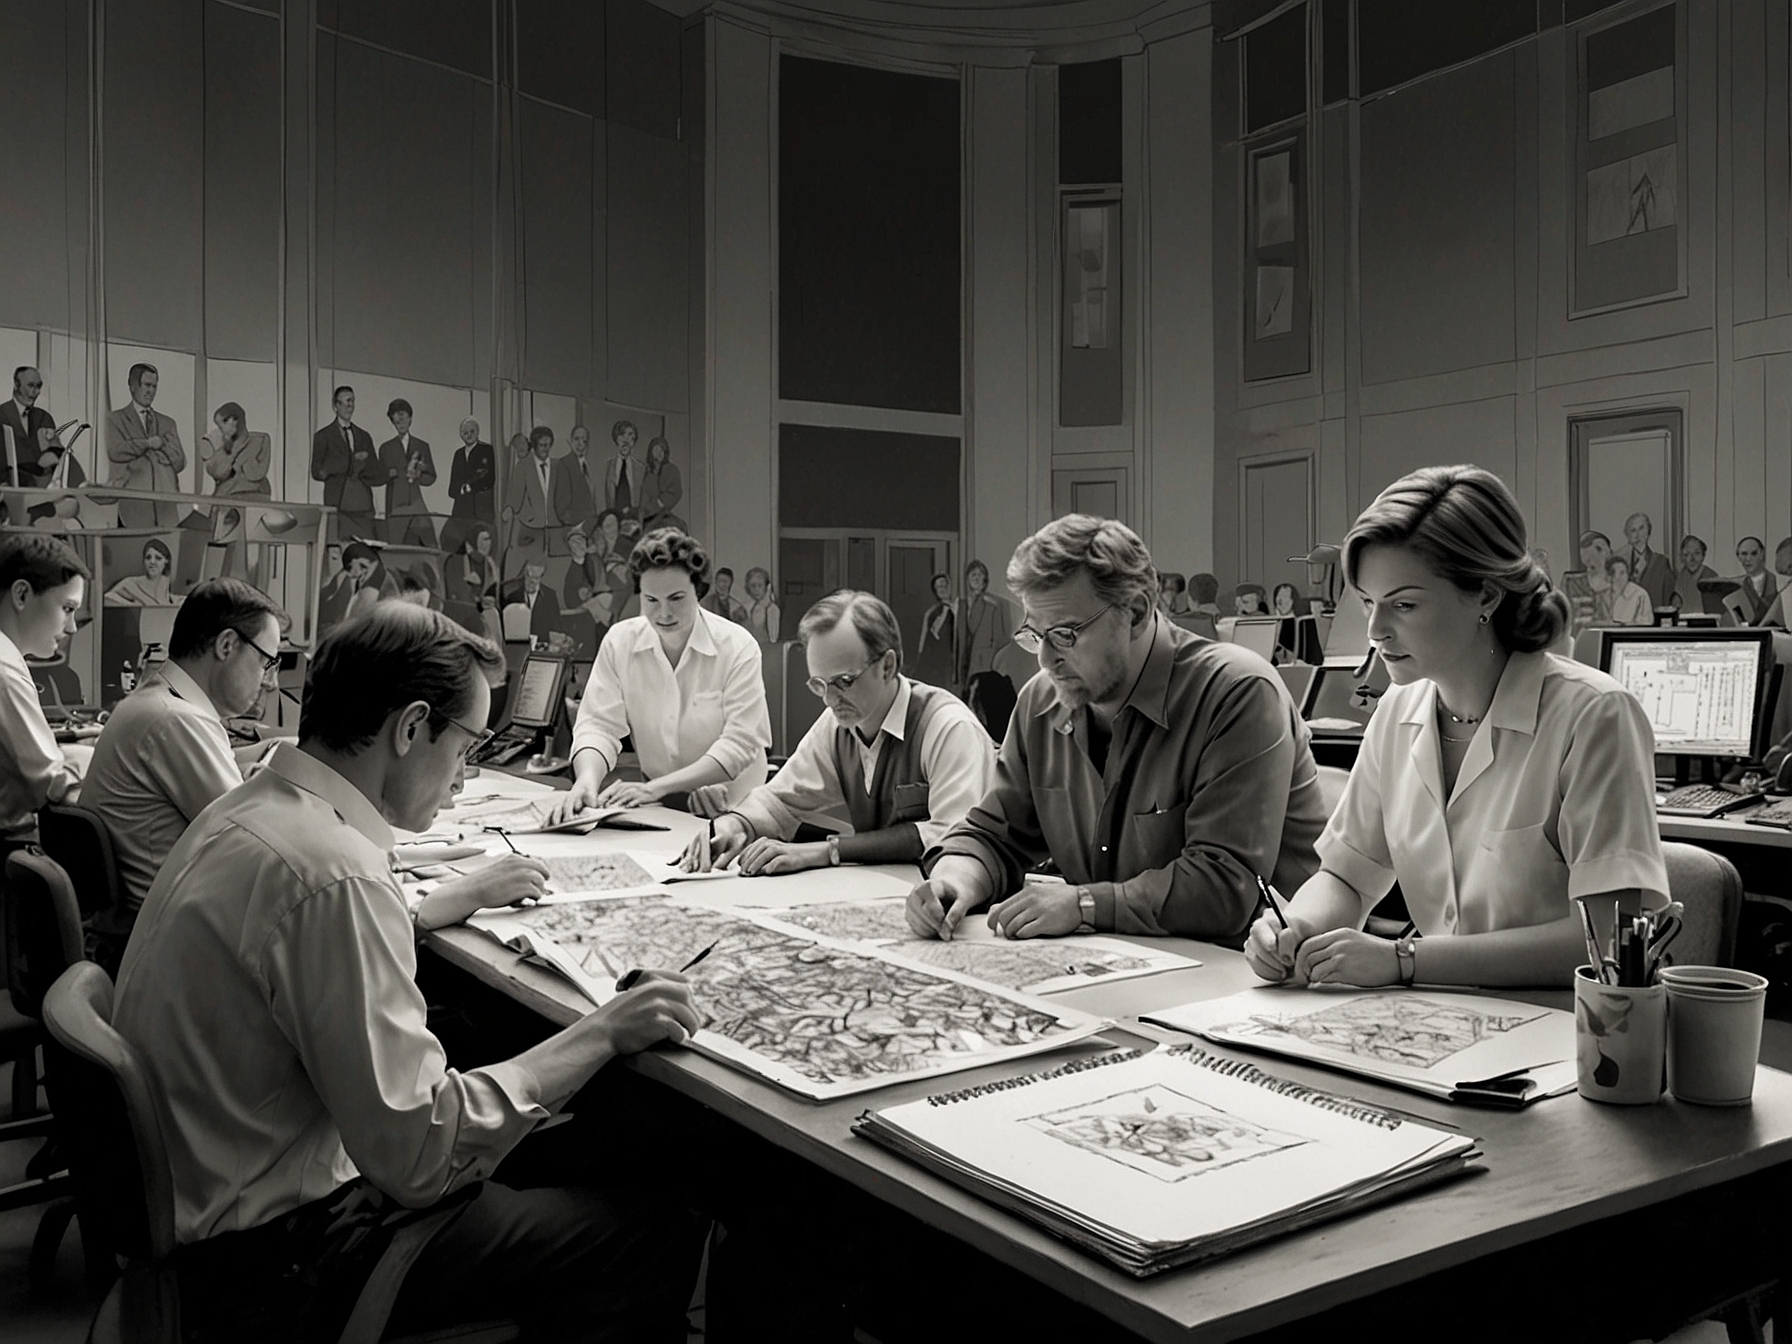 Behind-the-scenes shot of cast and crew members preparing for the 40th anniversary special episodes, highlighting the elaborate production efforts and the collaborative spirit on set.